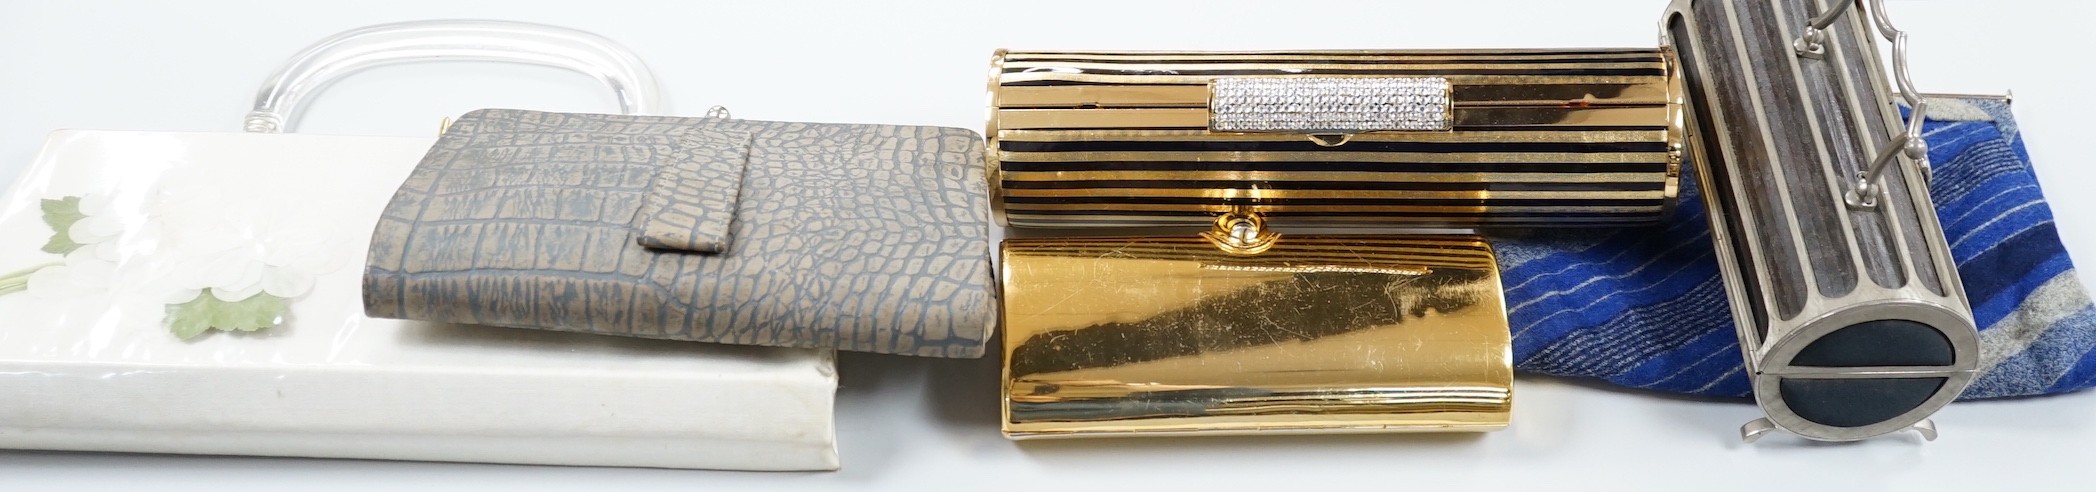 Two 1960's gilt metal ladies evening bags, a metal and wooden bag, a 1950's plastic and fabric bag possibly American, a 1930's faux crocodile clutch bag and a 1930's stripe clutch bag